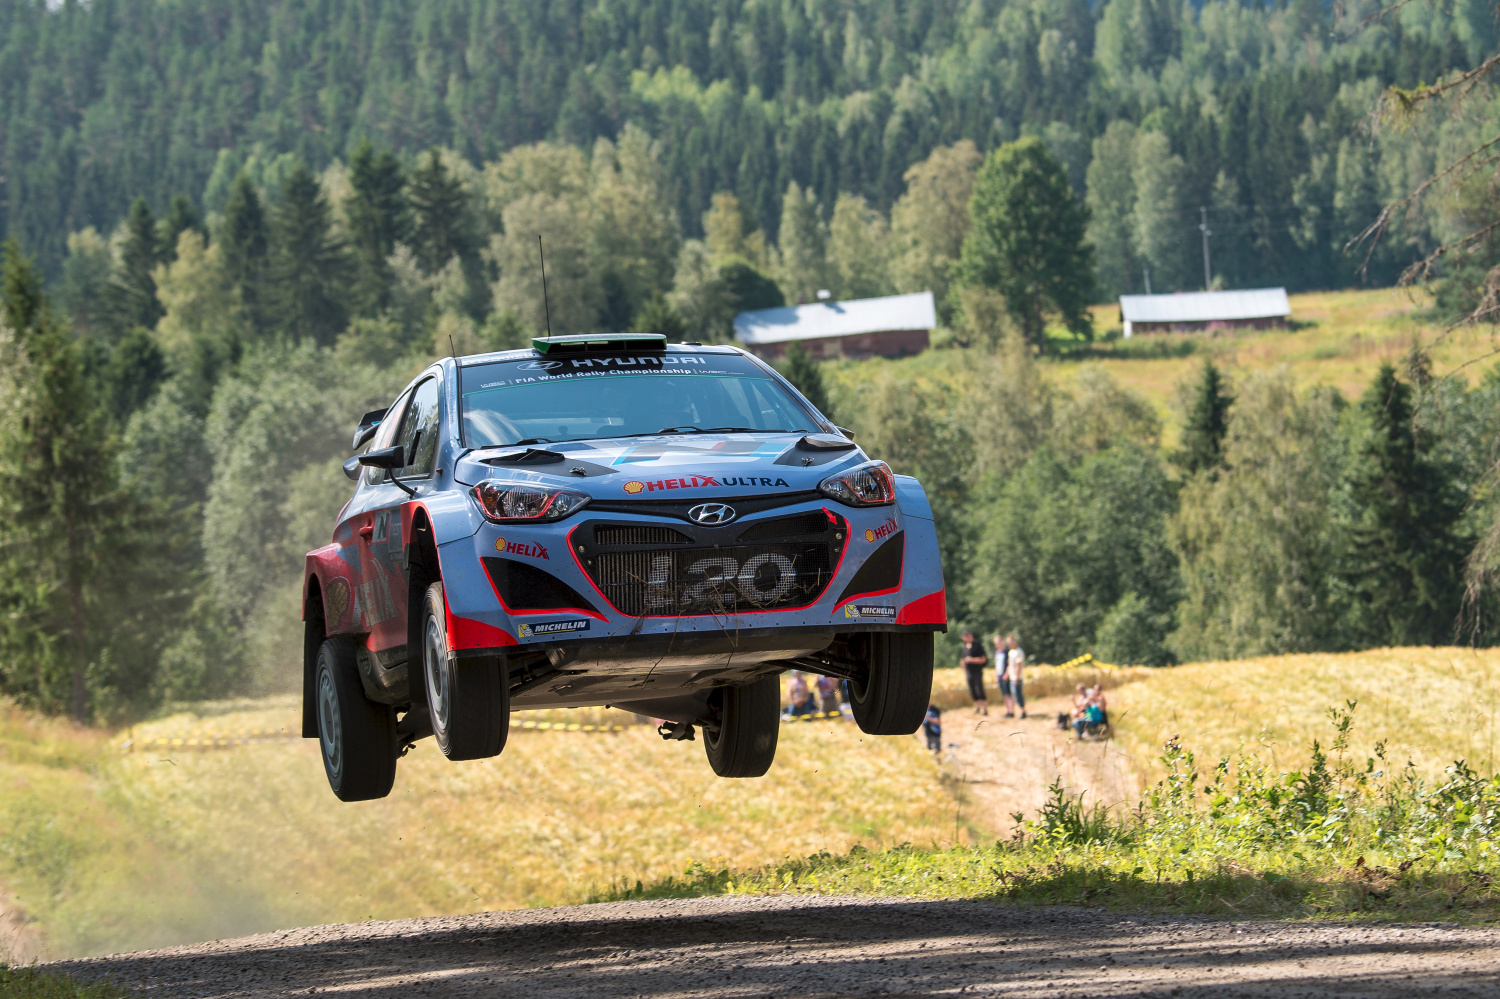 Paddon and Kennard hold top six in Finland